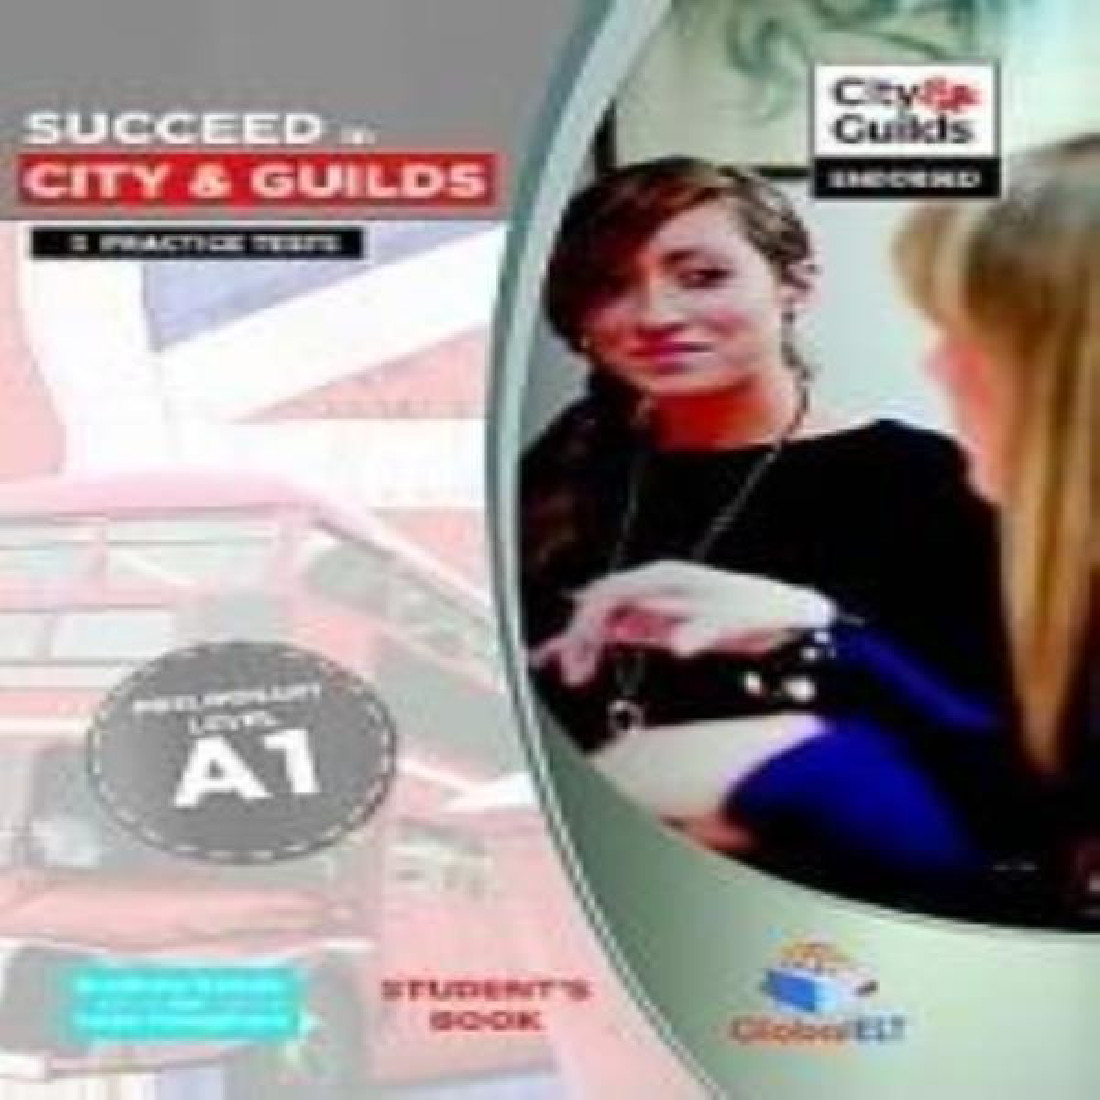 SUCCEED IN CITY & GUILDS A1 5 PRACTICE TESTS (ENDORSED) STUDENTS BOOK